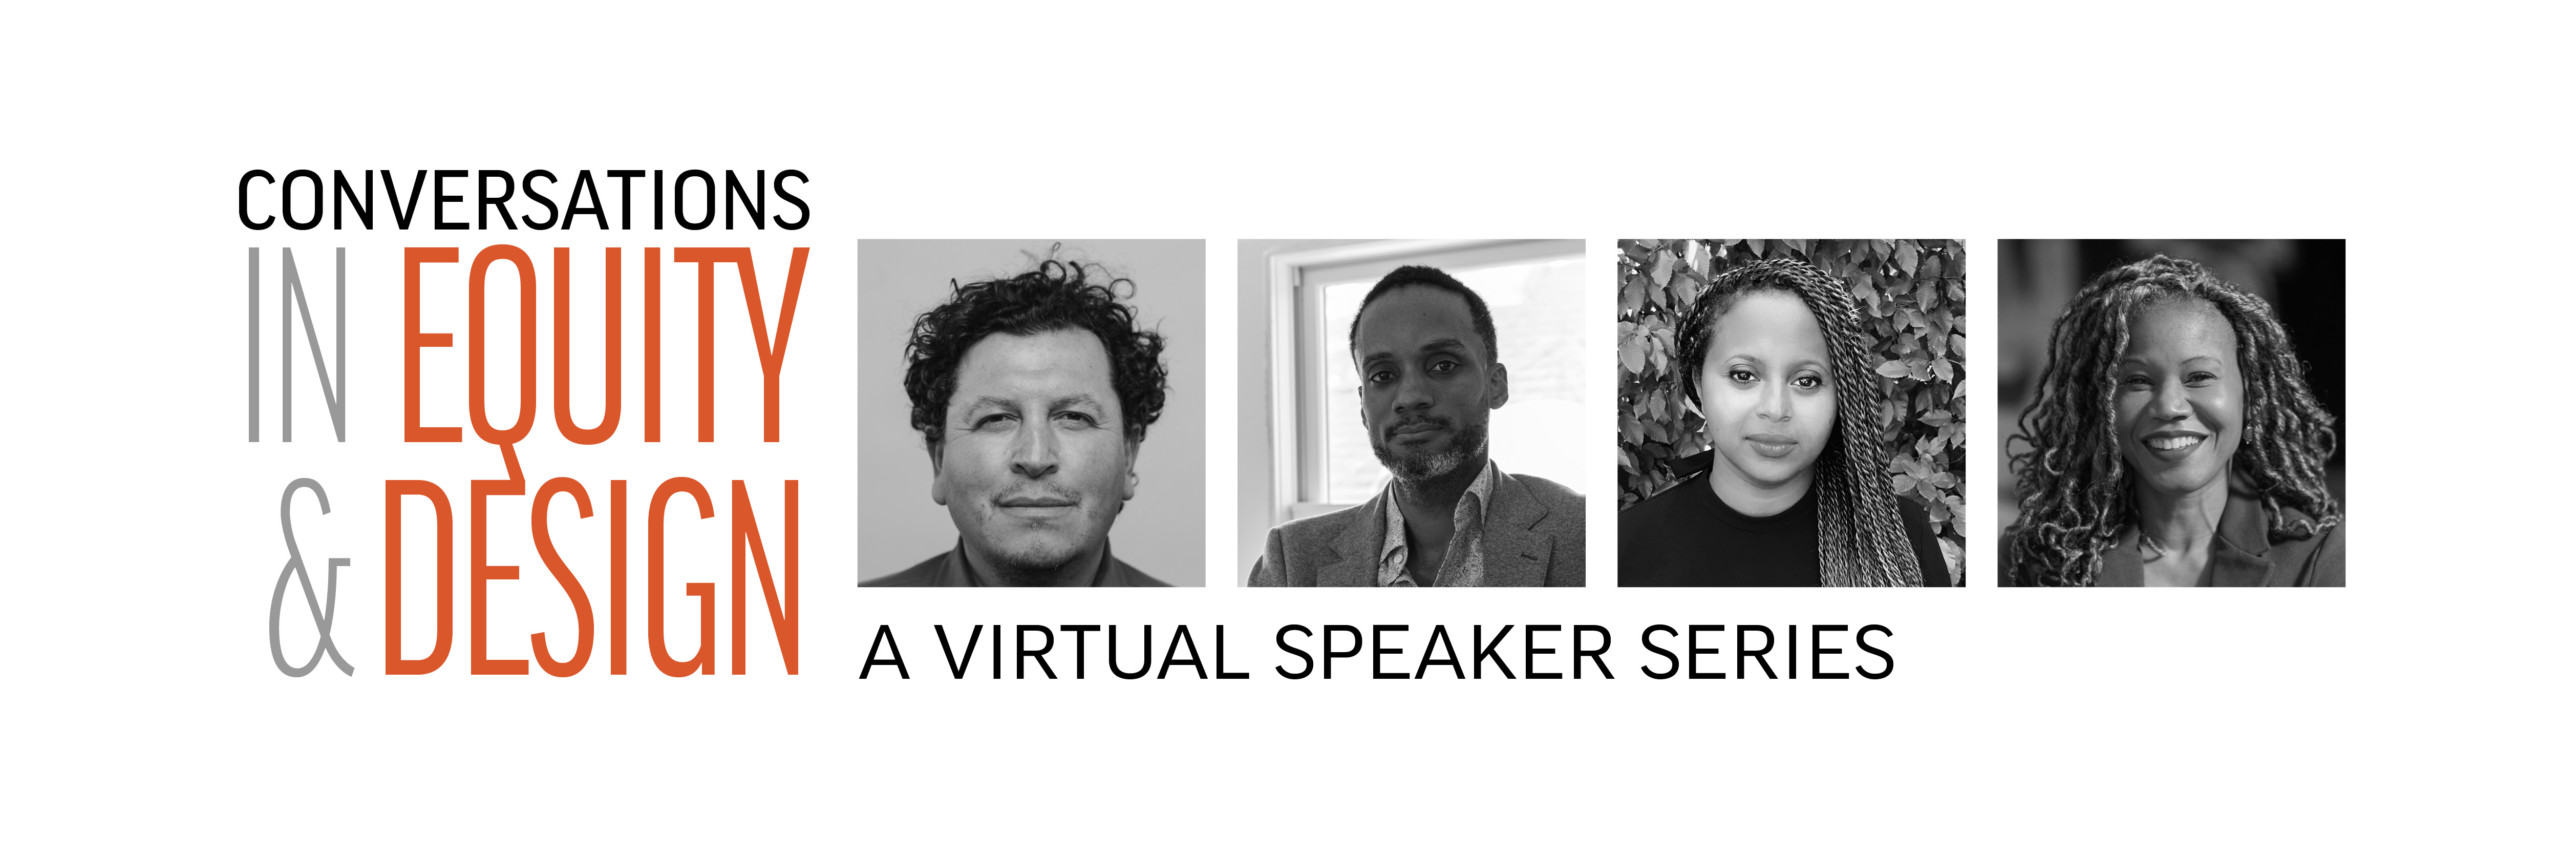 Conversations in Equity and Design: A Virtual Speaker Series